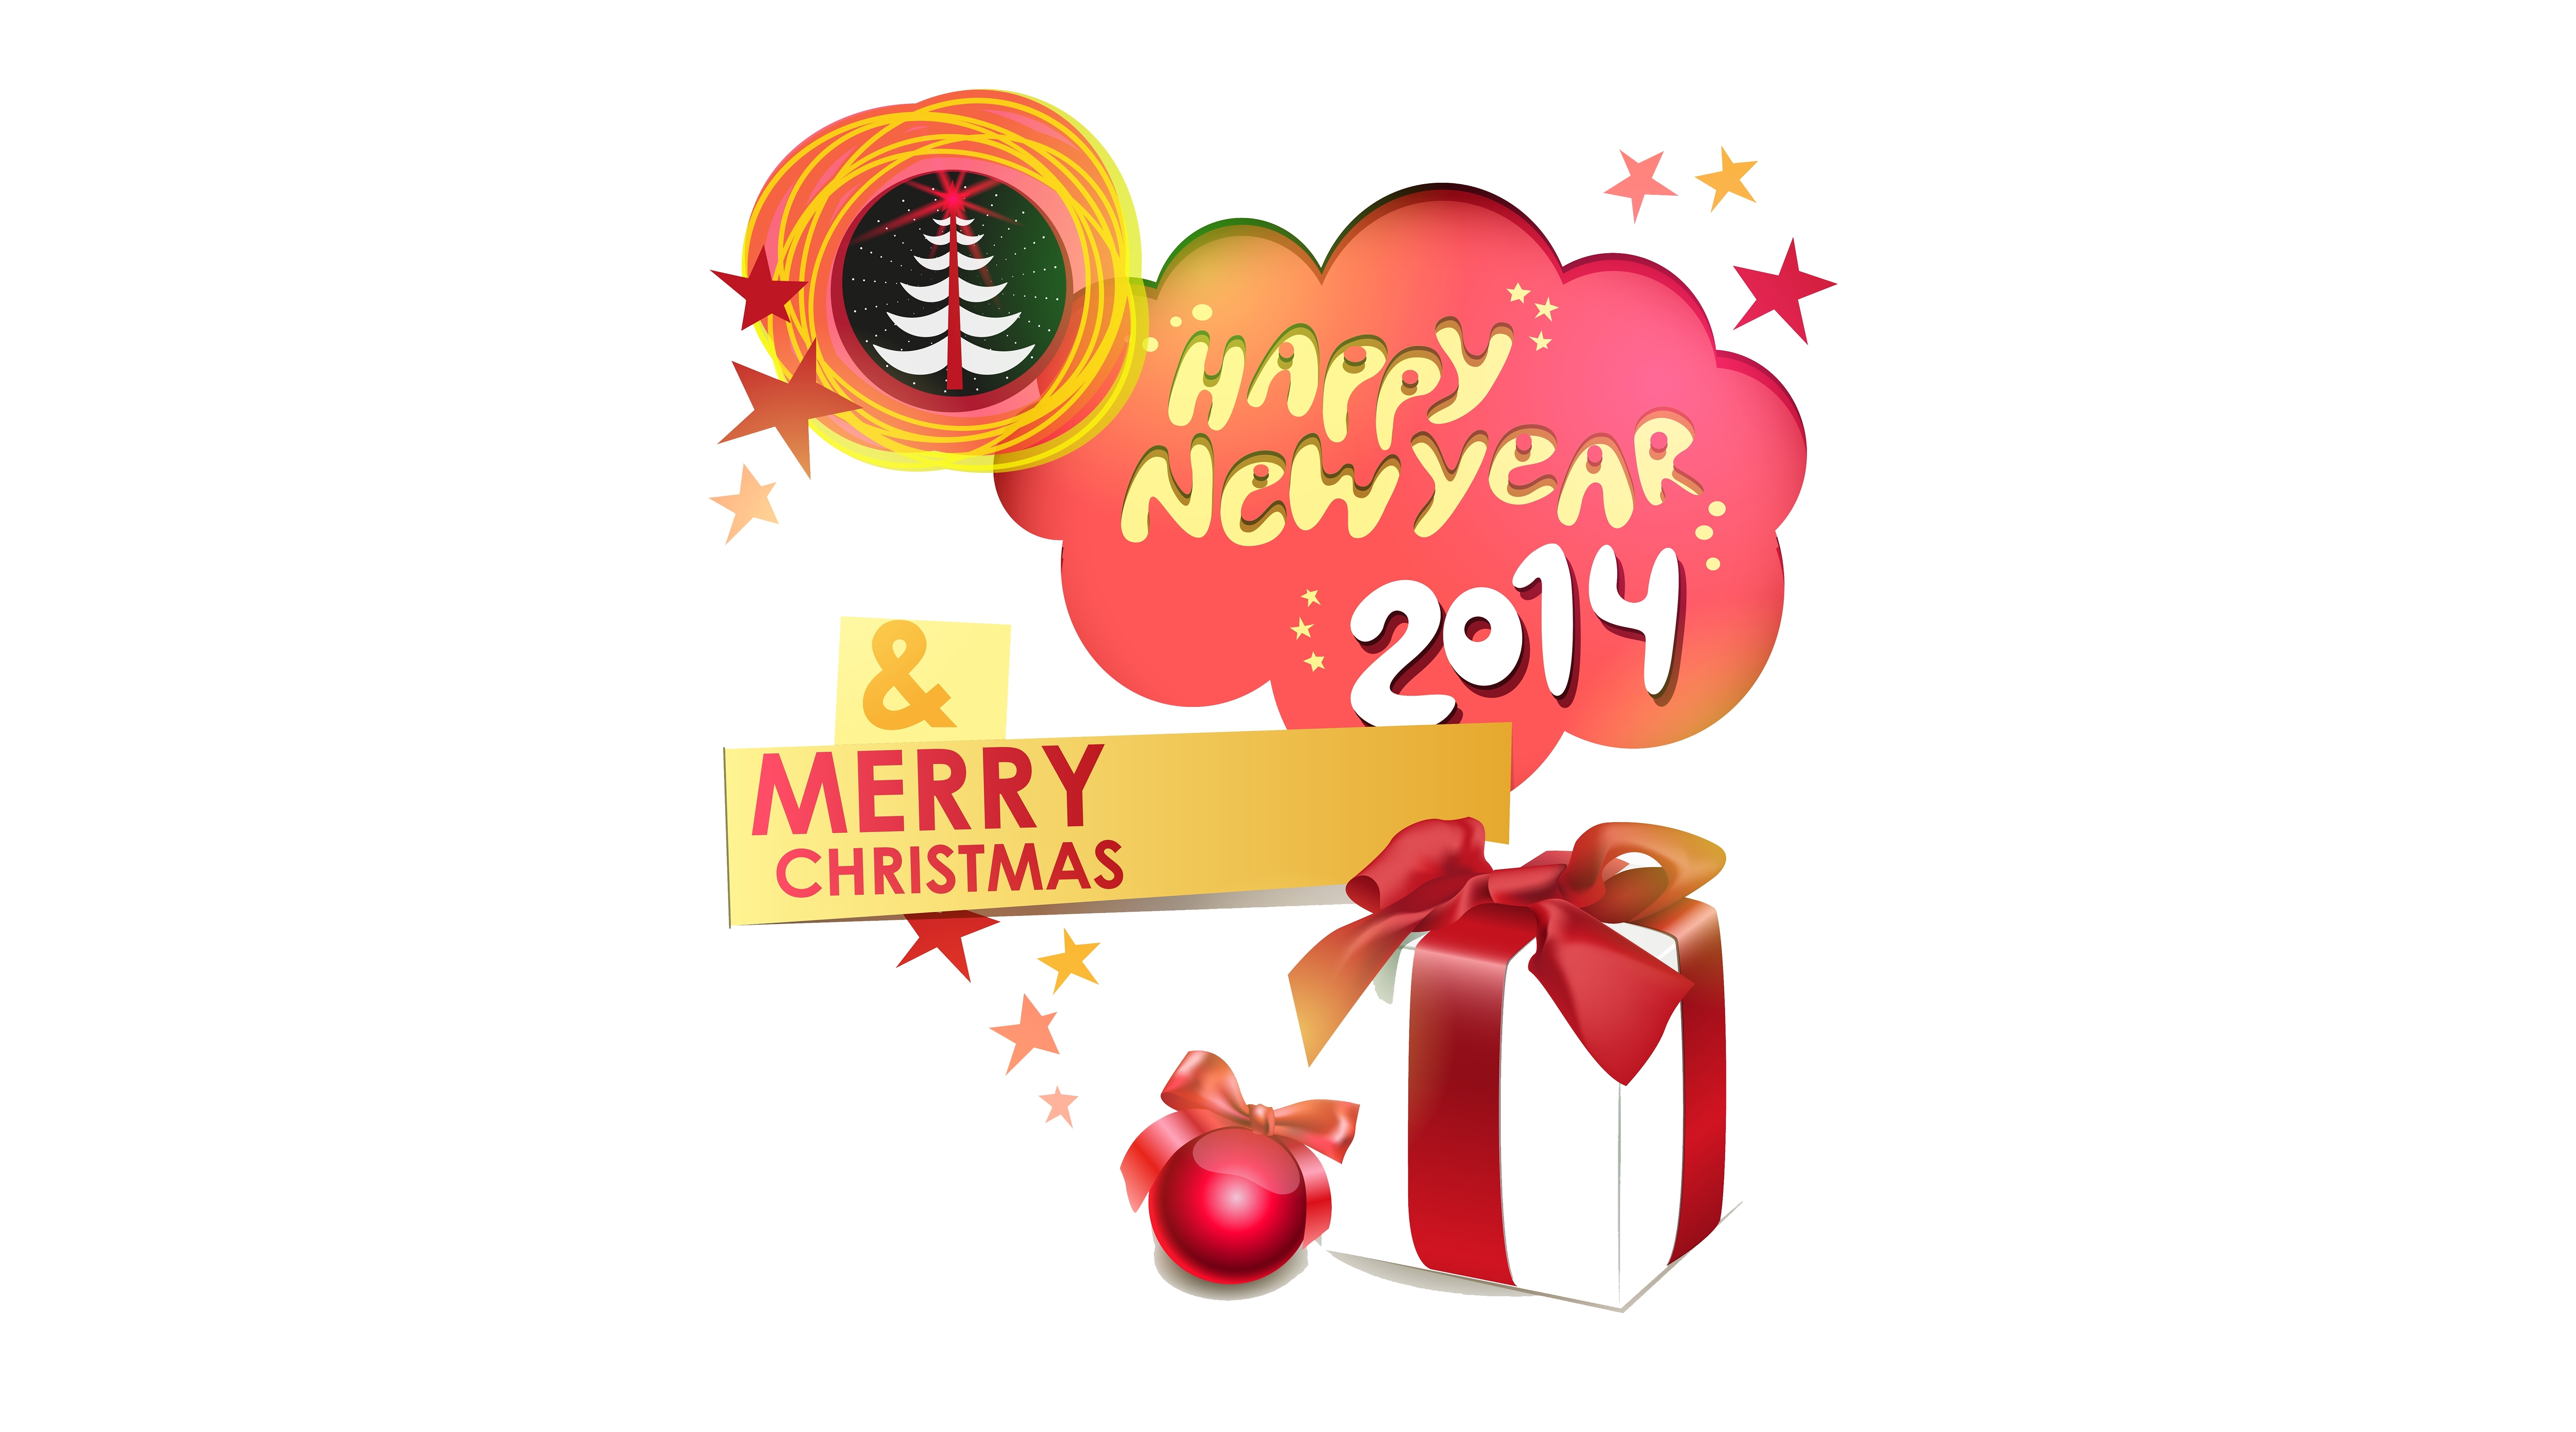 Happy New Year and Merry Christmas 2014 wallpapers and images ...